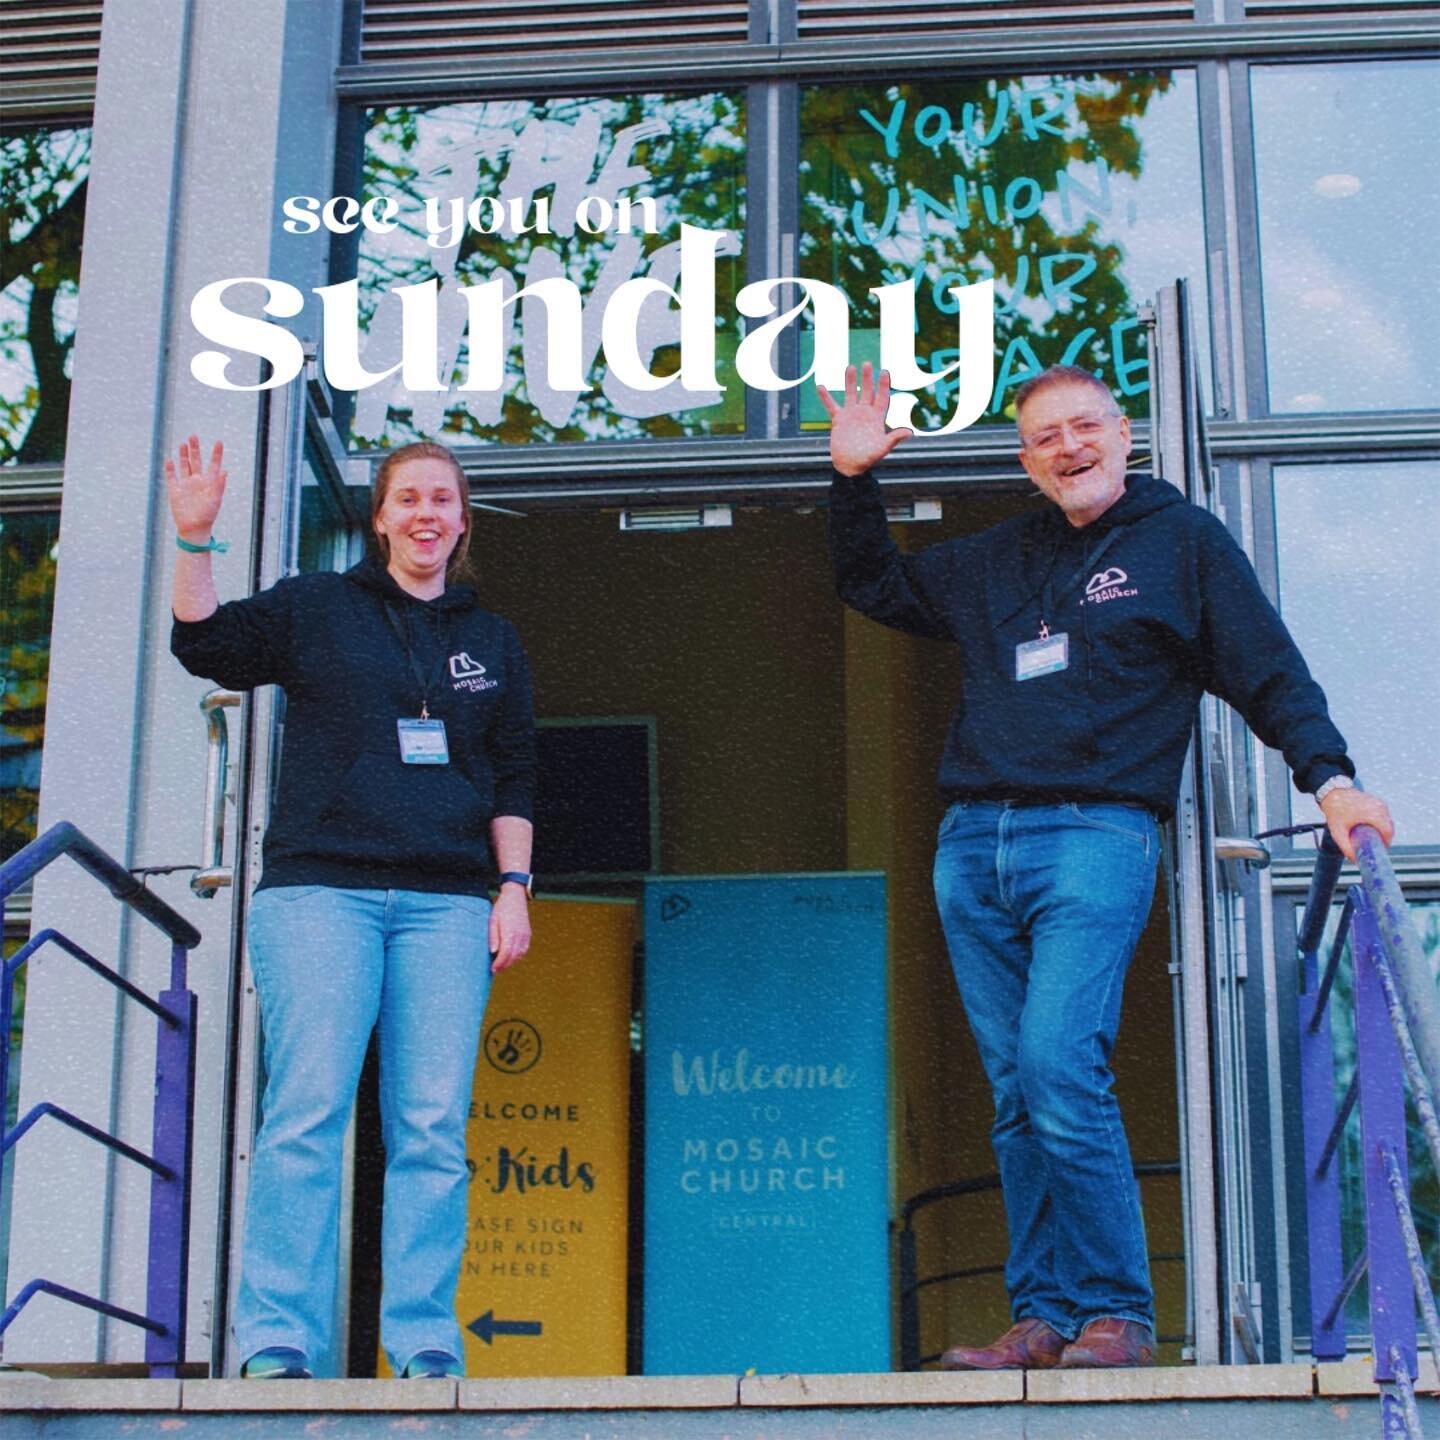 We hope you had a great Community Outreach Sunday! We&rsquo;re looking forward to meeting again this Sunday as normal at Leeds Beckett Student Union at 10:30am - see you there! 🙂